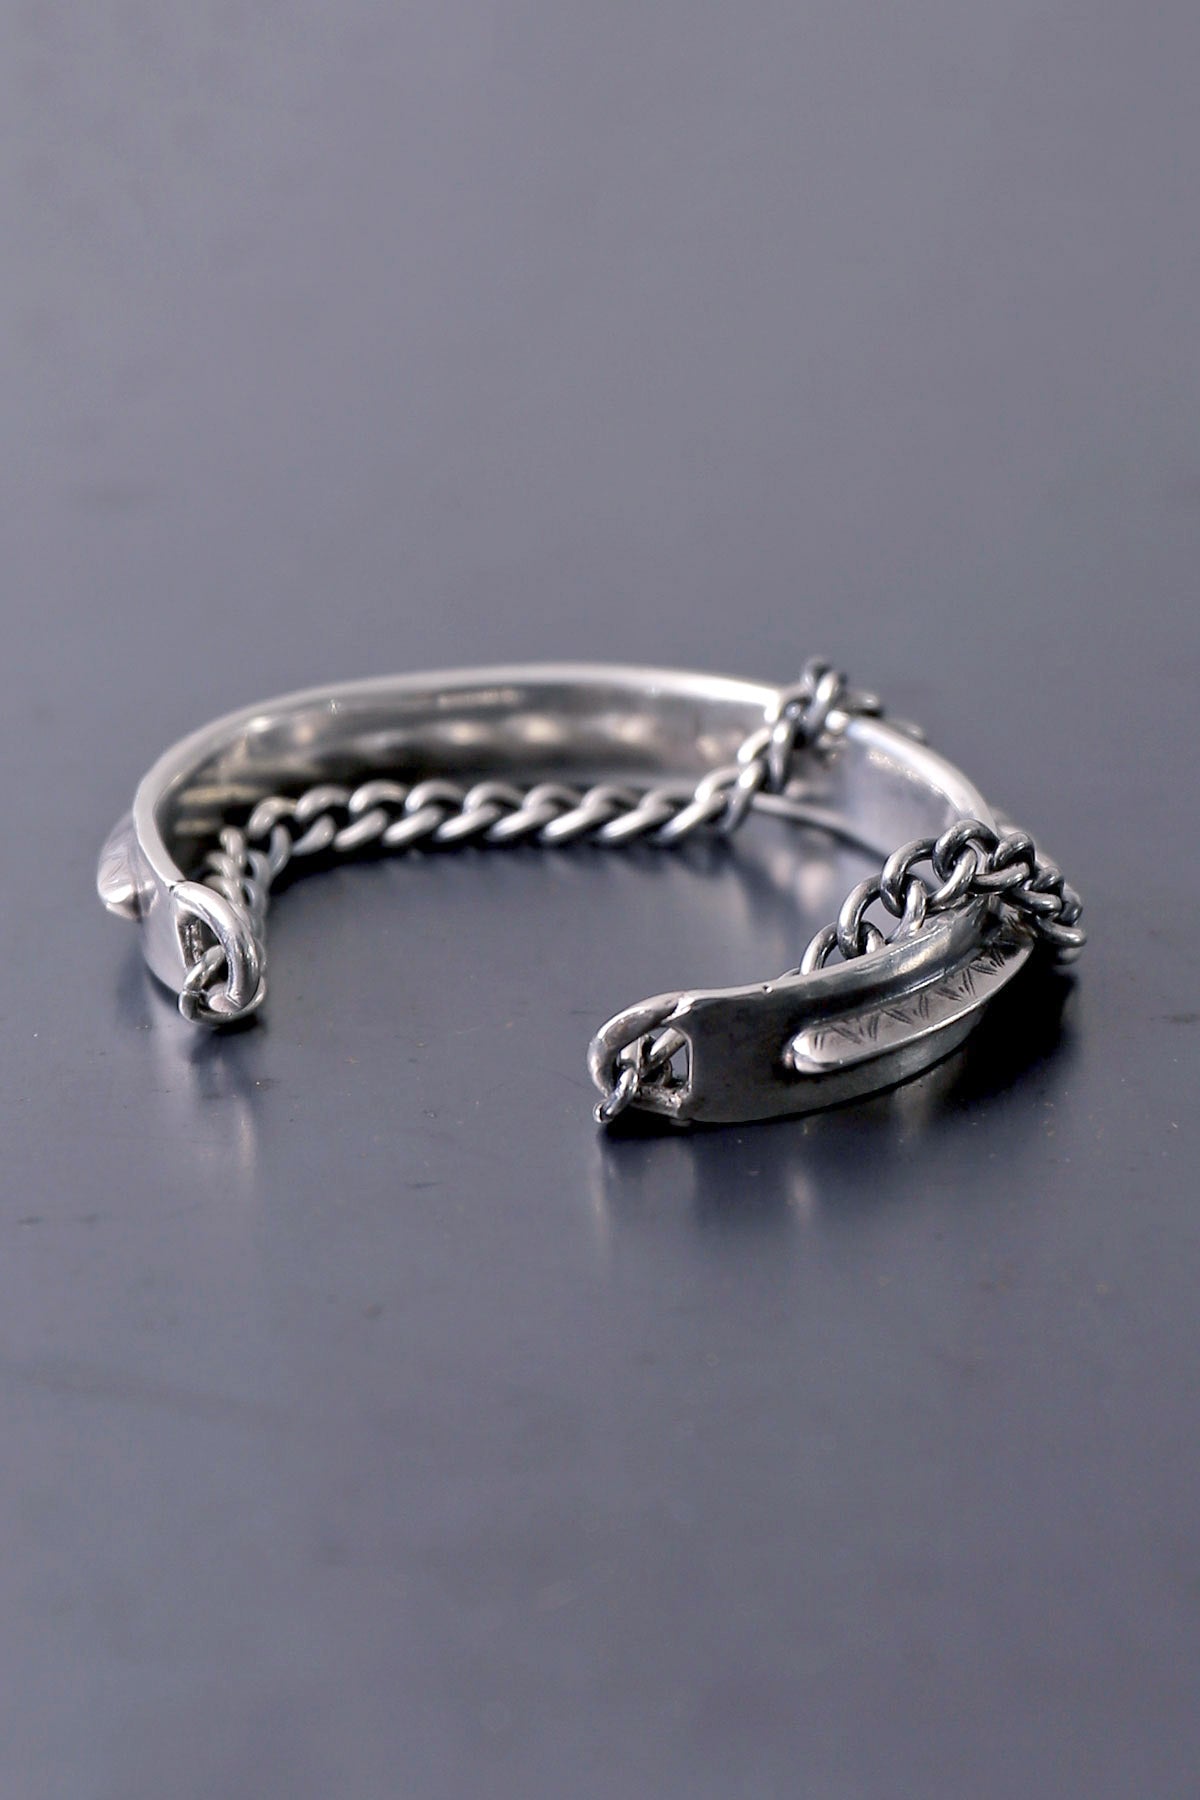 【Rusty Thought】 ENGLAVED SILVER BANGLE &amp; CUFF CHAIN_WCB5_L